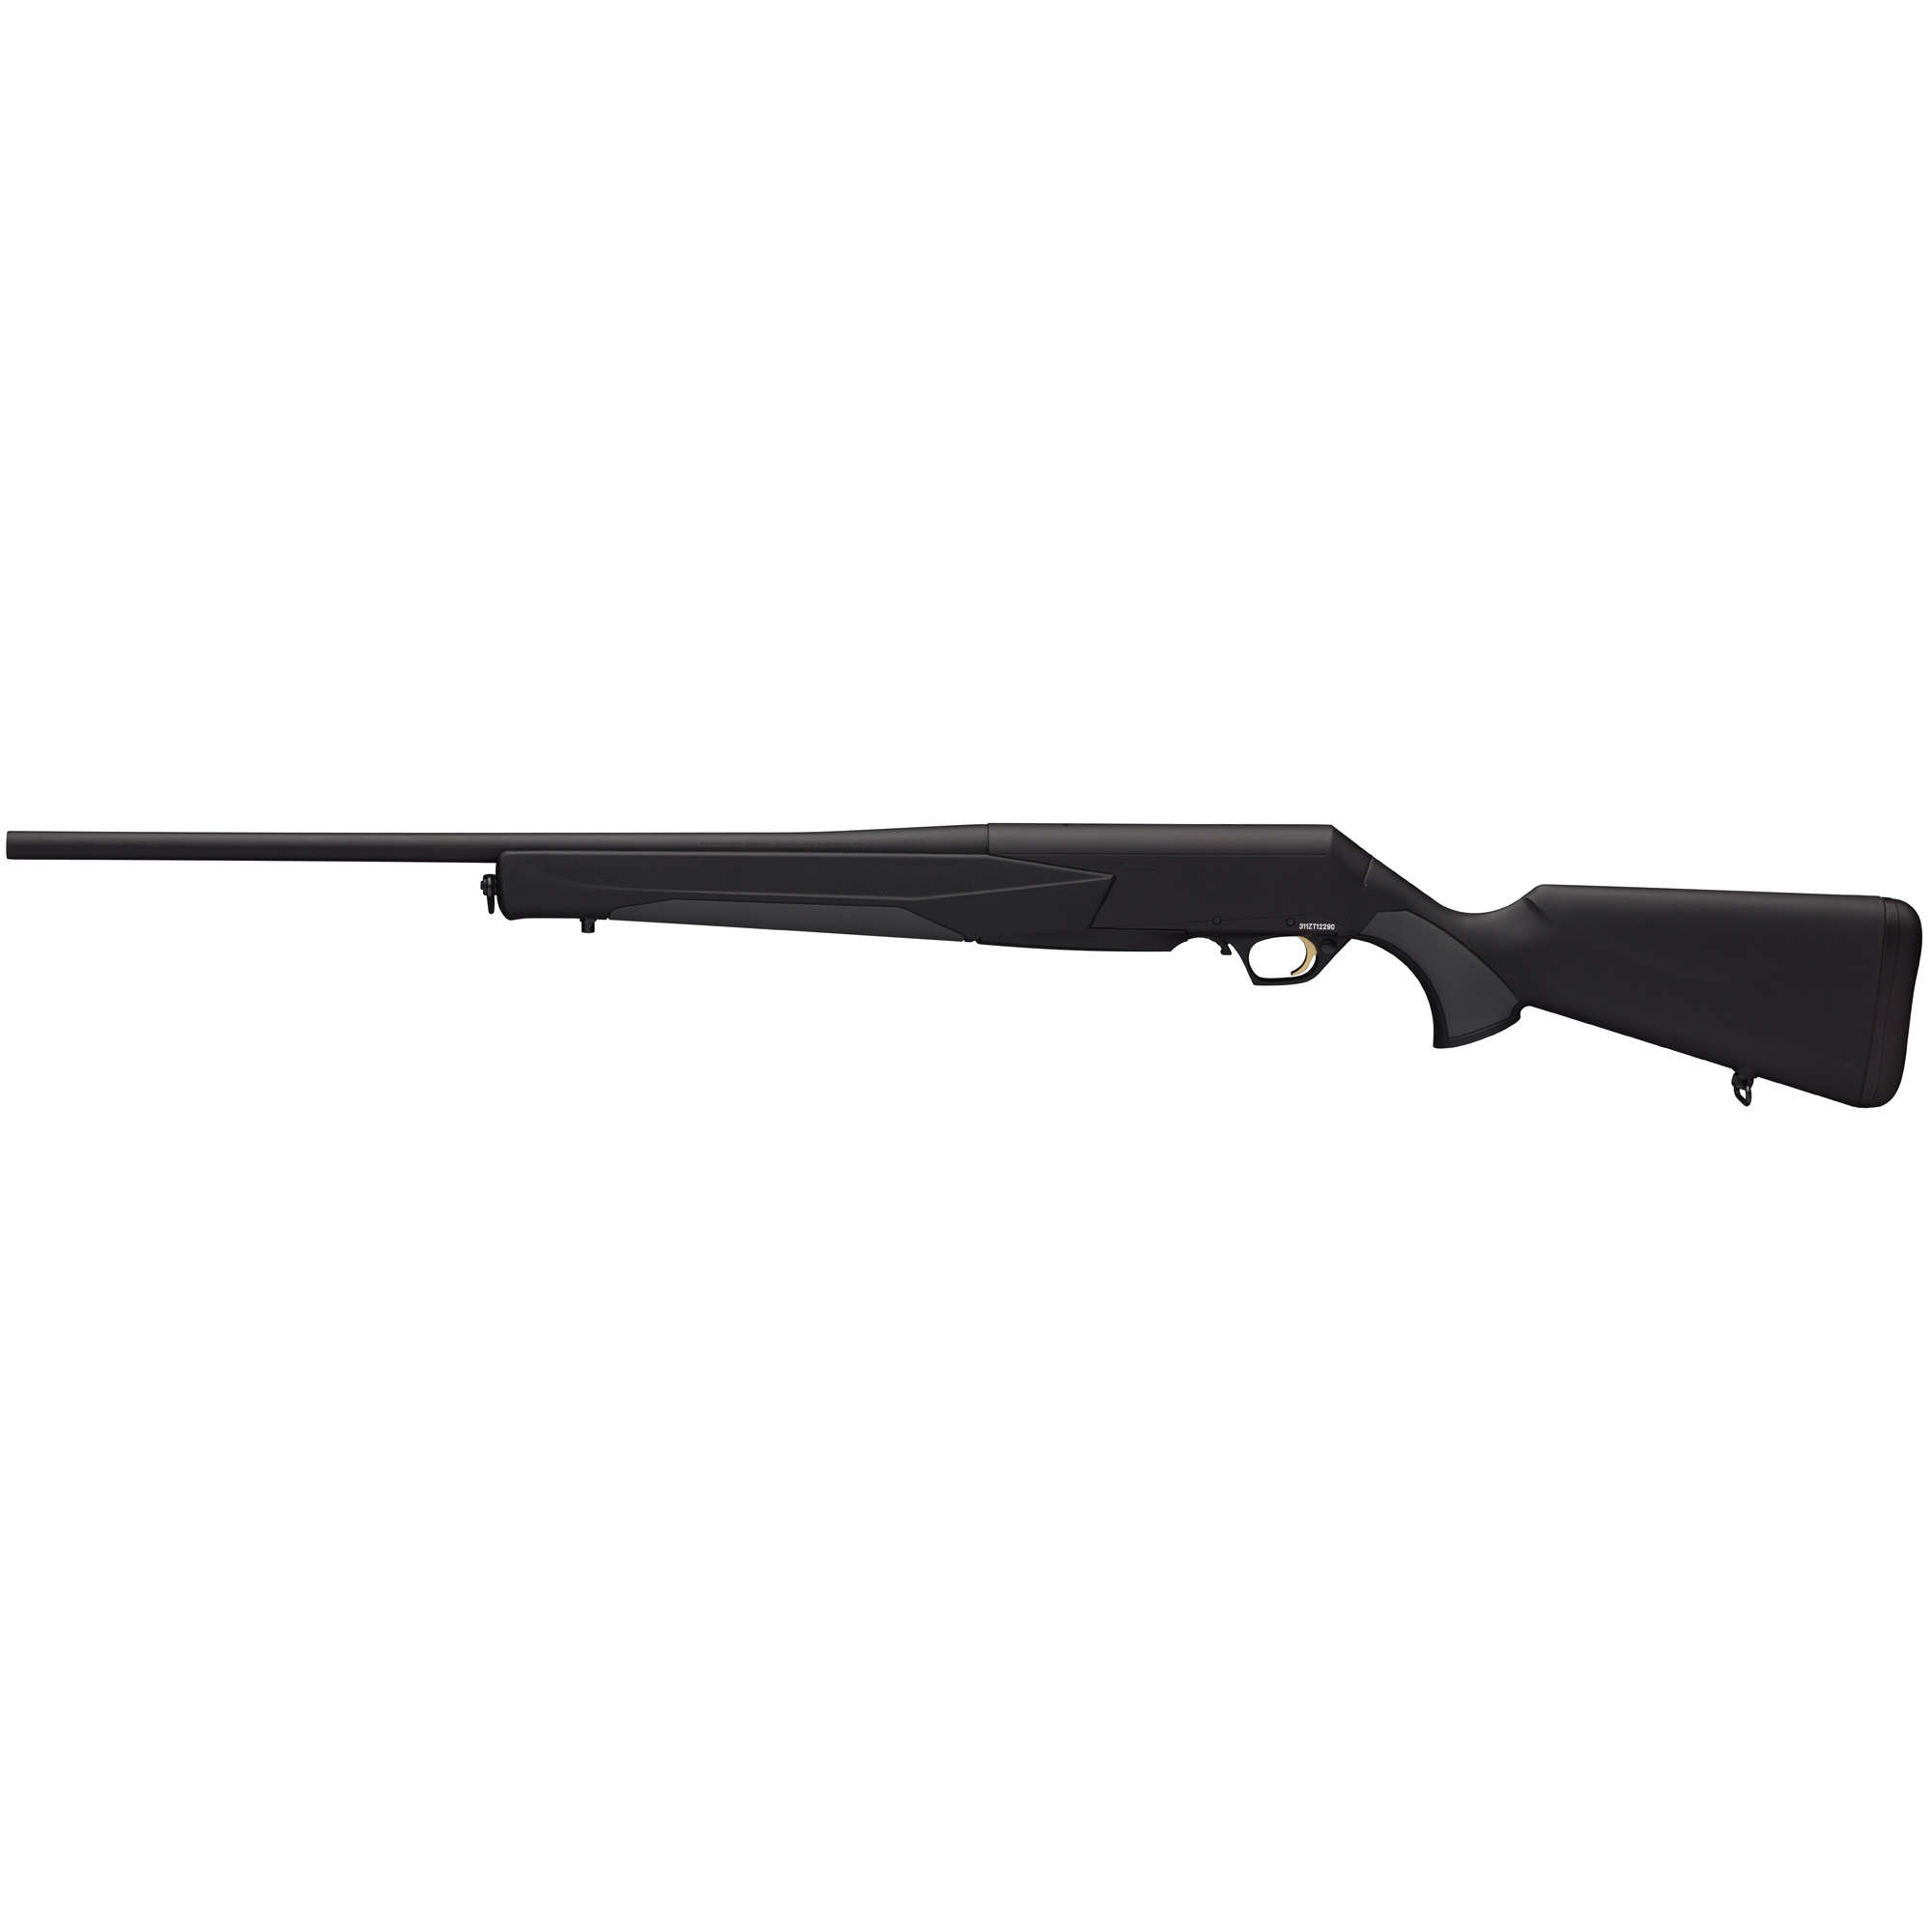 Browning, BAR, Mark III Stalker, Semi-automatic Rifle, 308 Winchester, 22" Barrel, Matte Finish, Black, Composite Stock, 4 Rounds